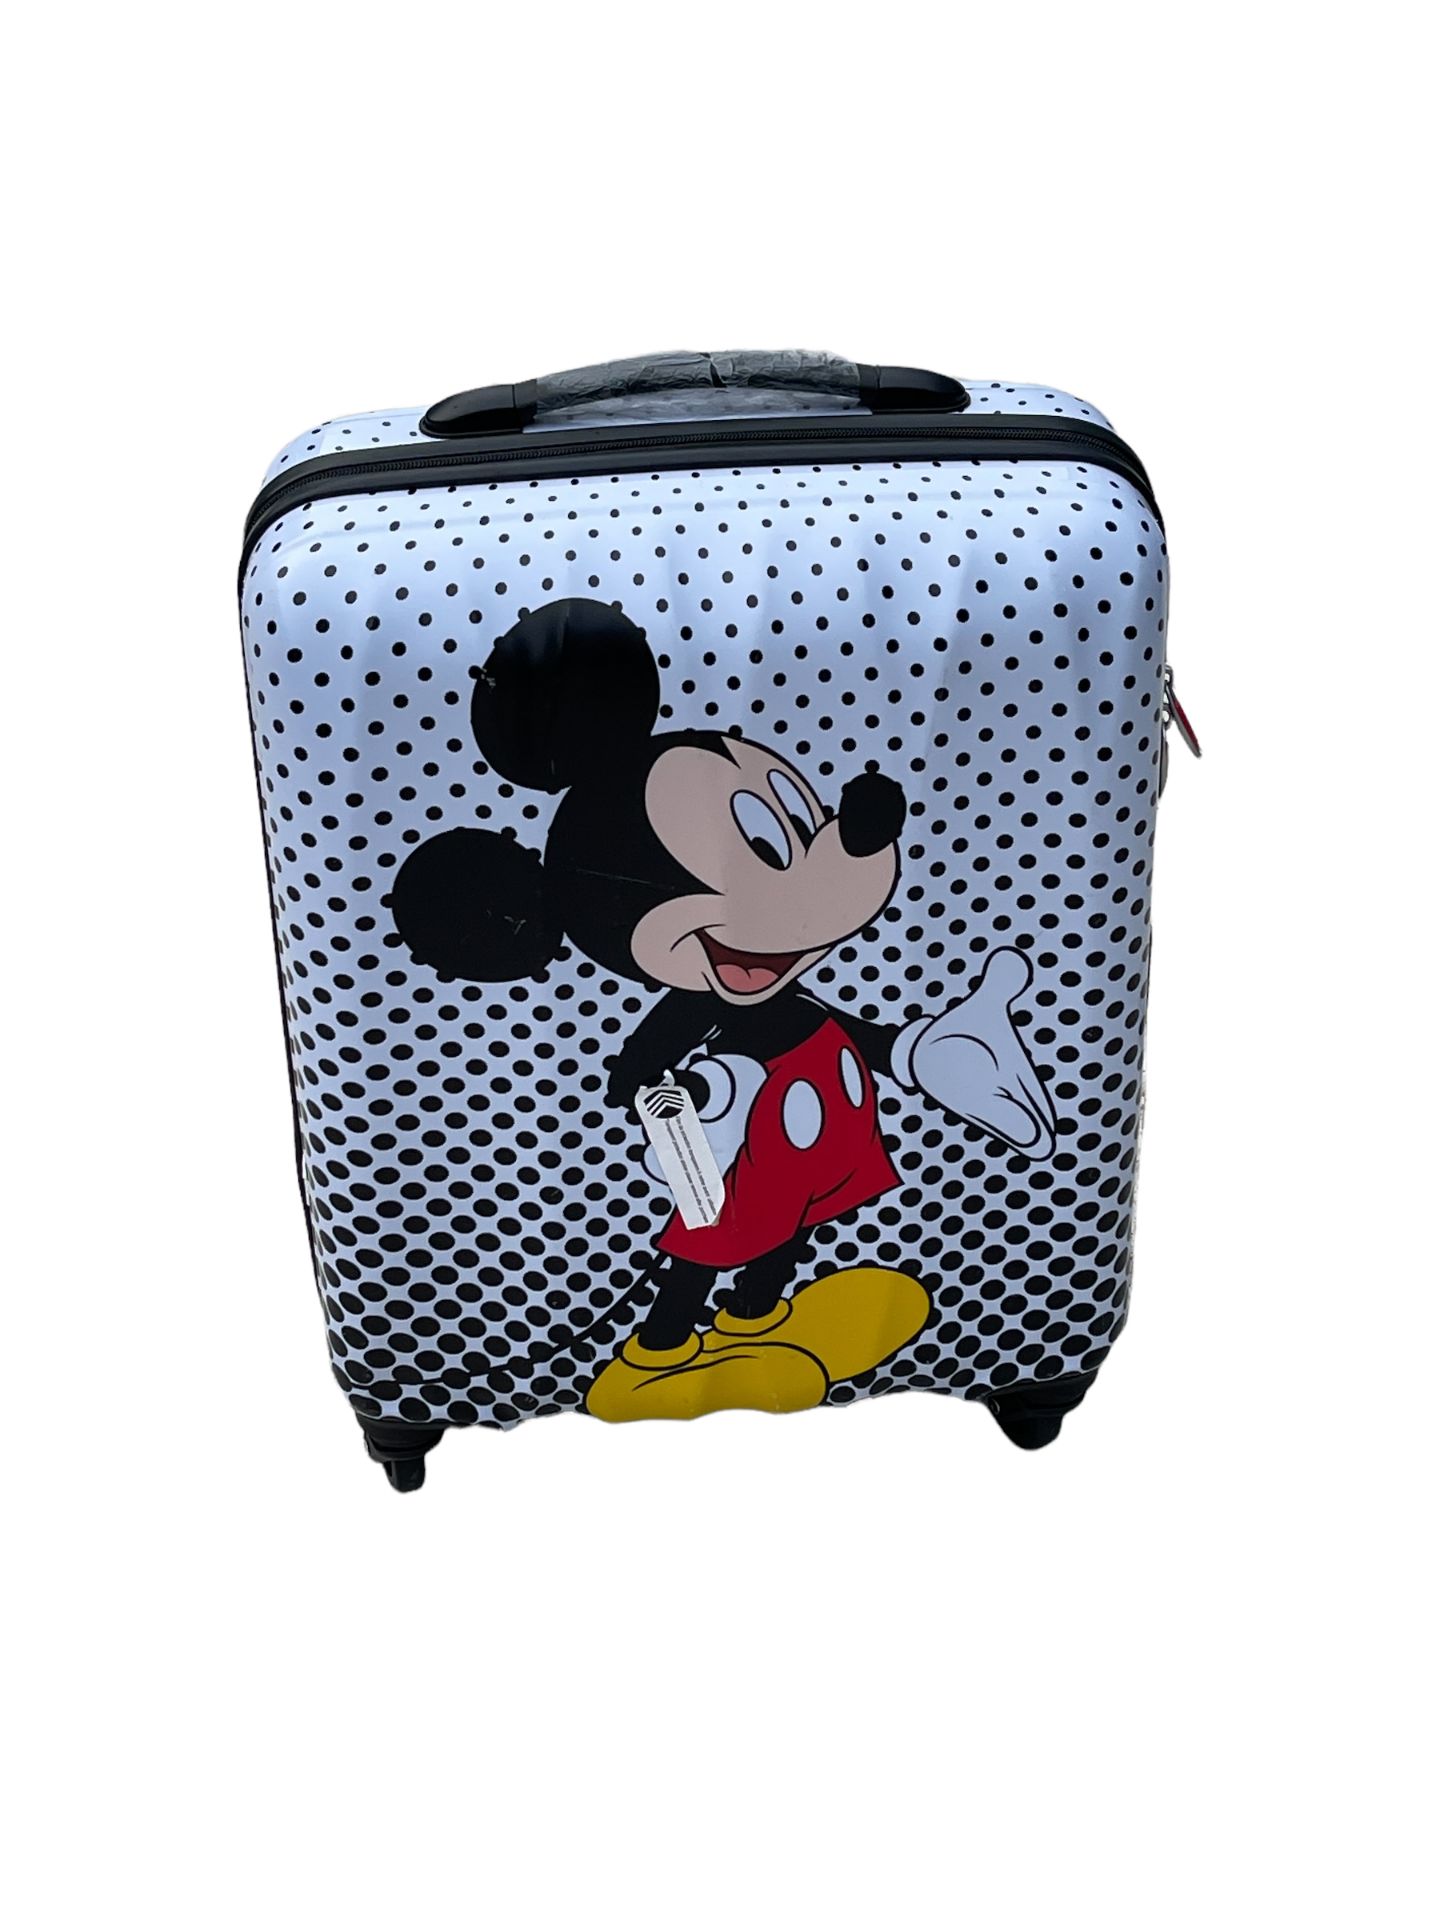 American Tourister Disney Mickey Mouse Polka Dot Carry-on Spinner Case 55cm - RRP £145 - Image 3 of 9